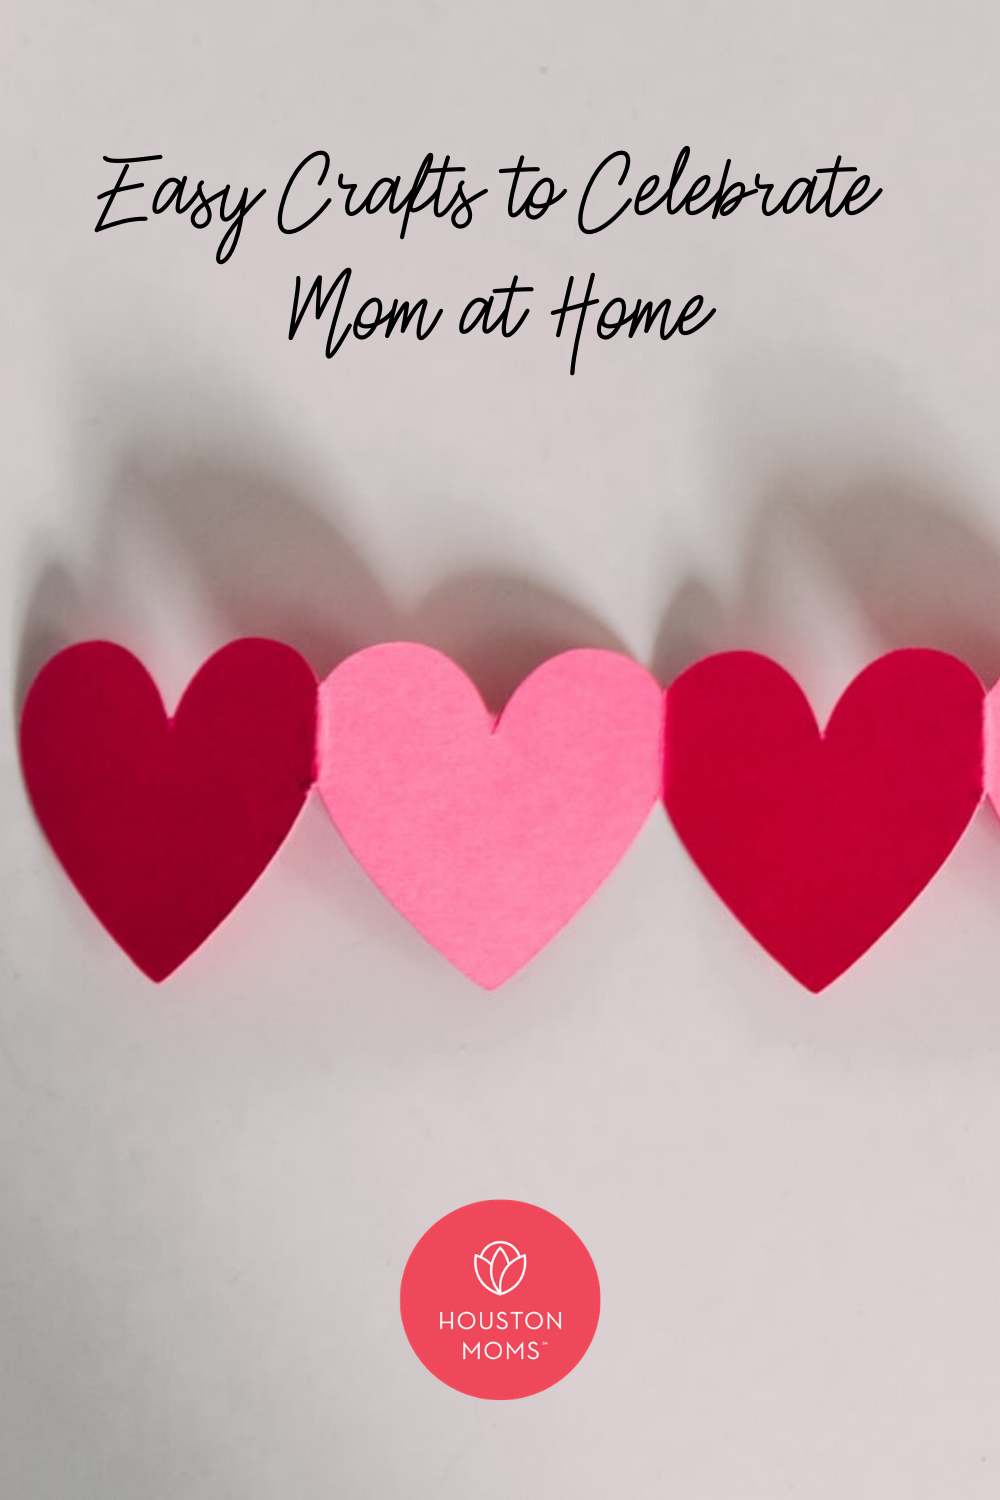 Houston Moms "Easy Crafts to Celebrate Mom at Home" #houstonmoms #houstonmomsblog #momsaroundhouston